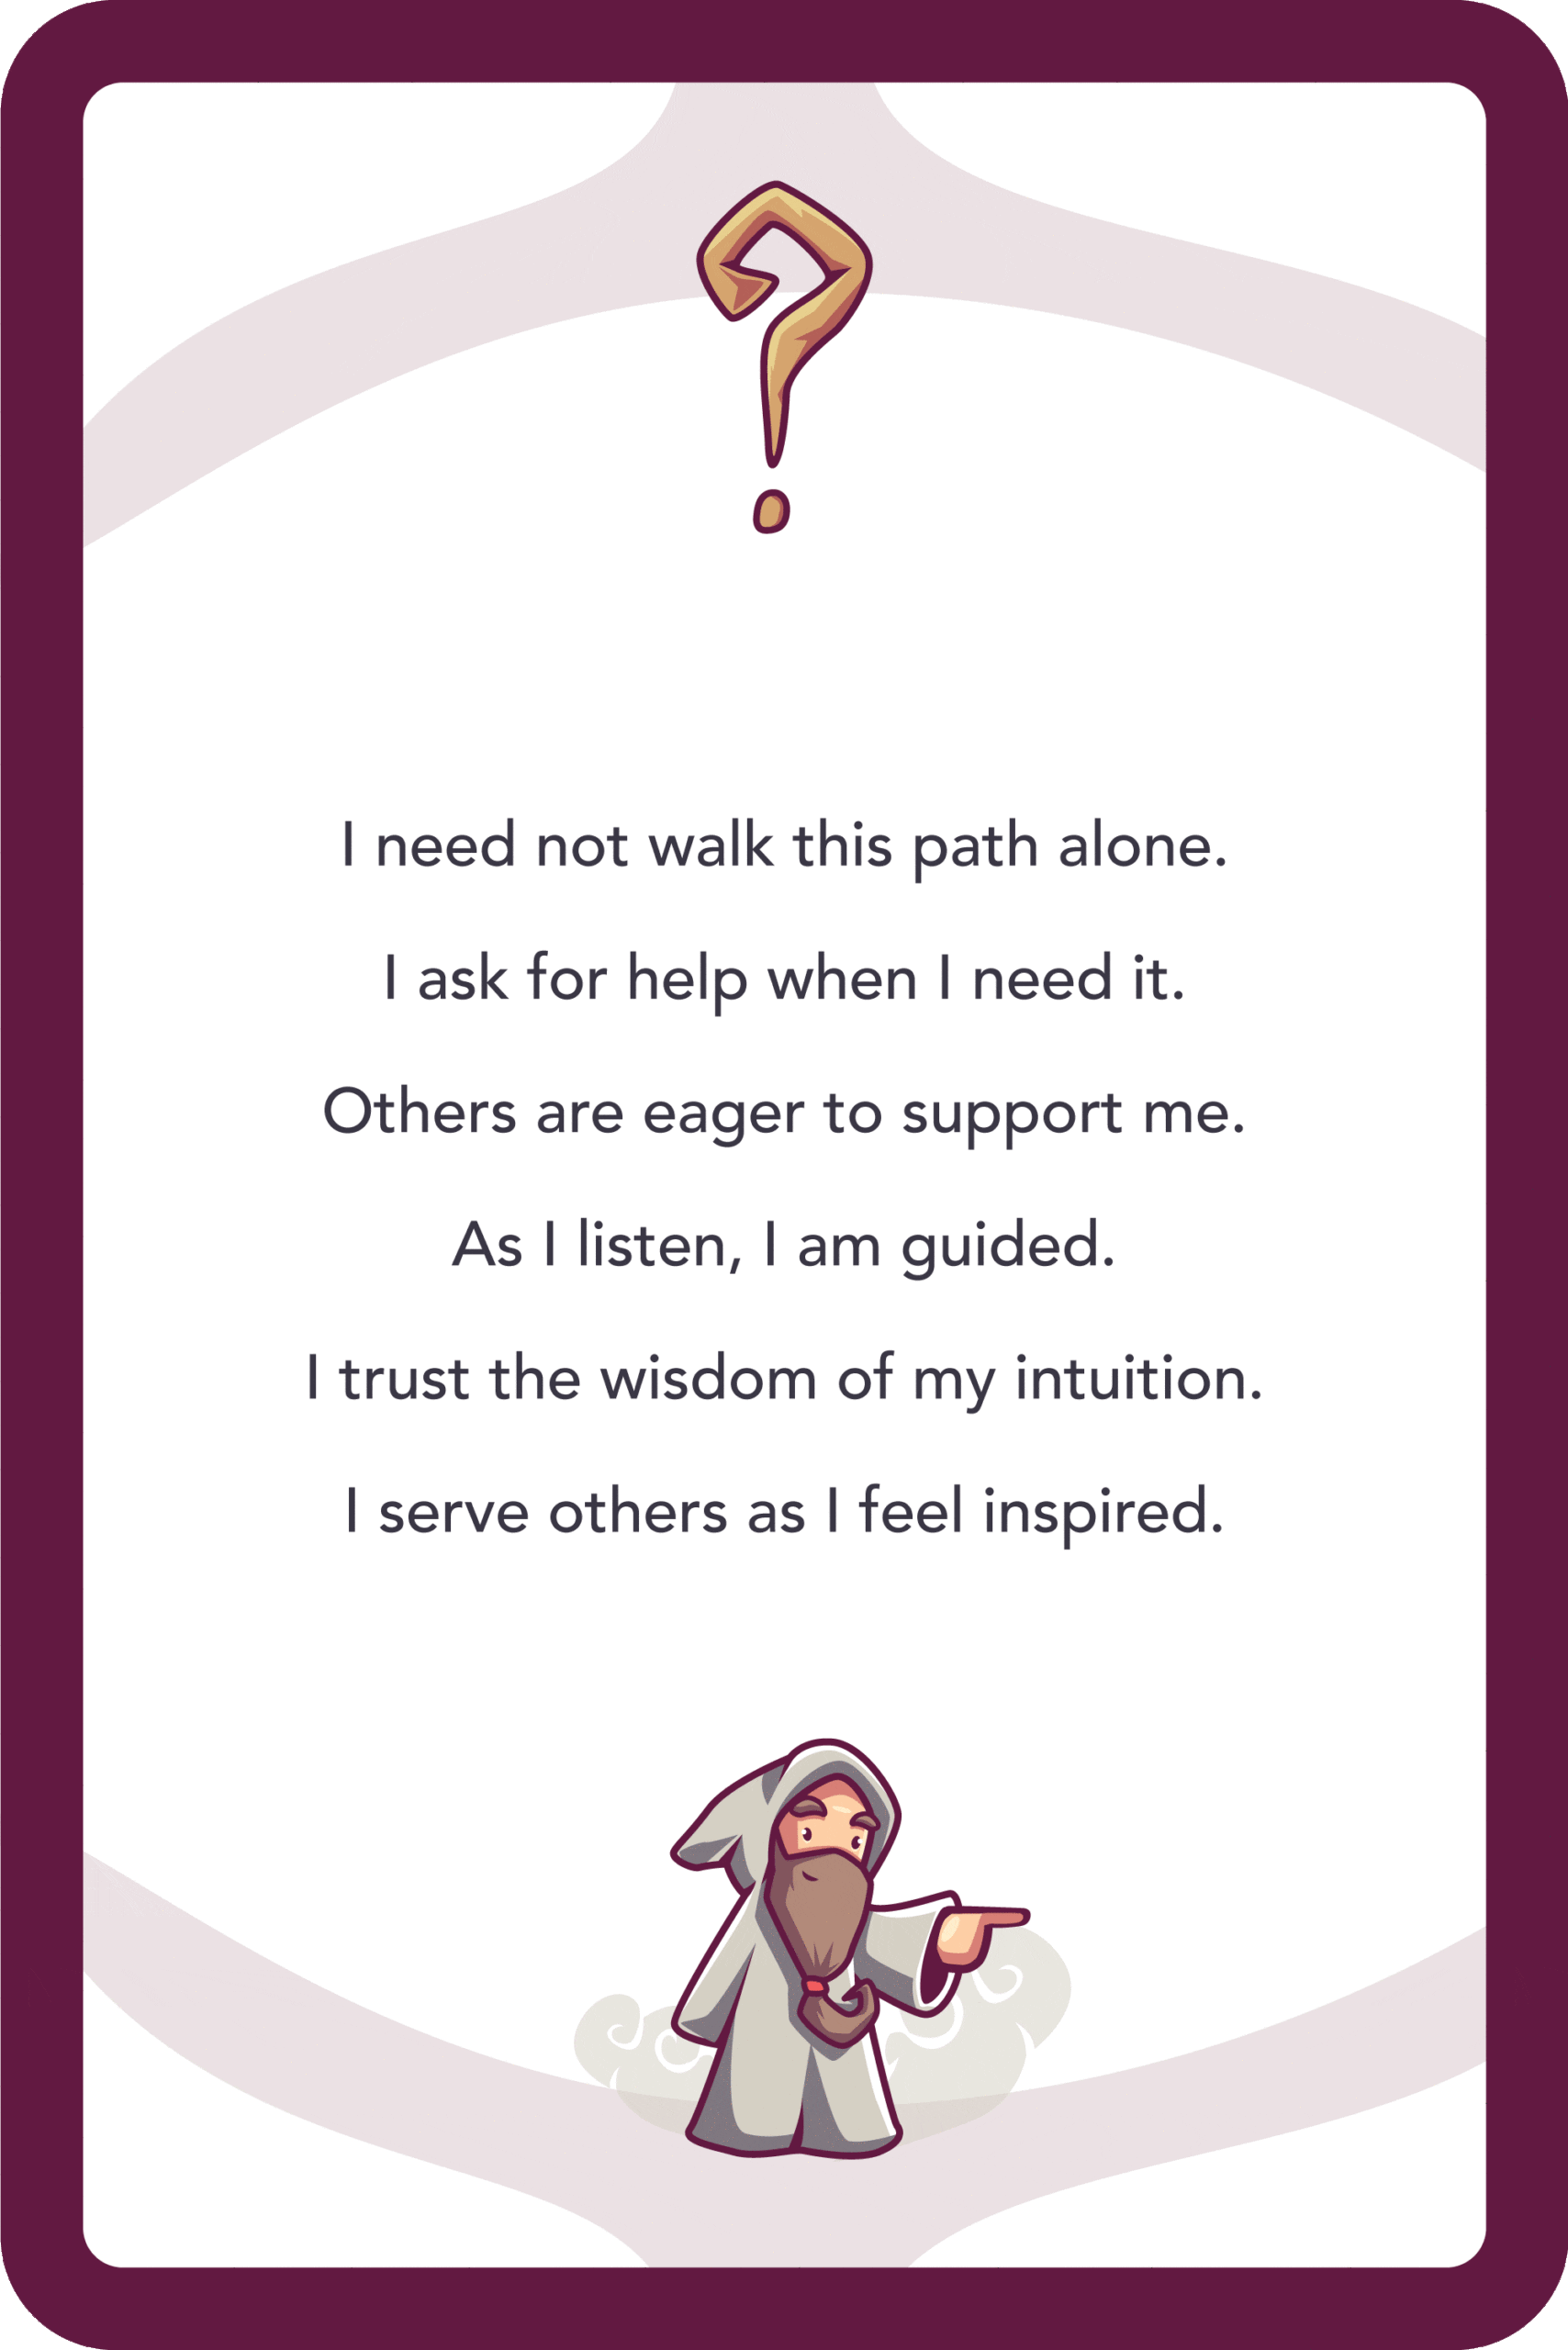 I AM GUIDED affirmation